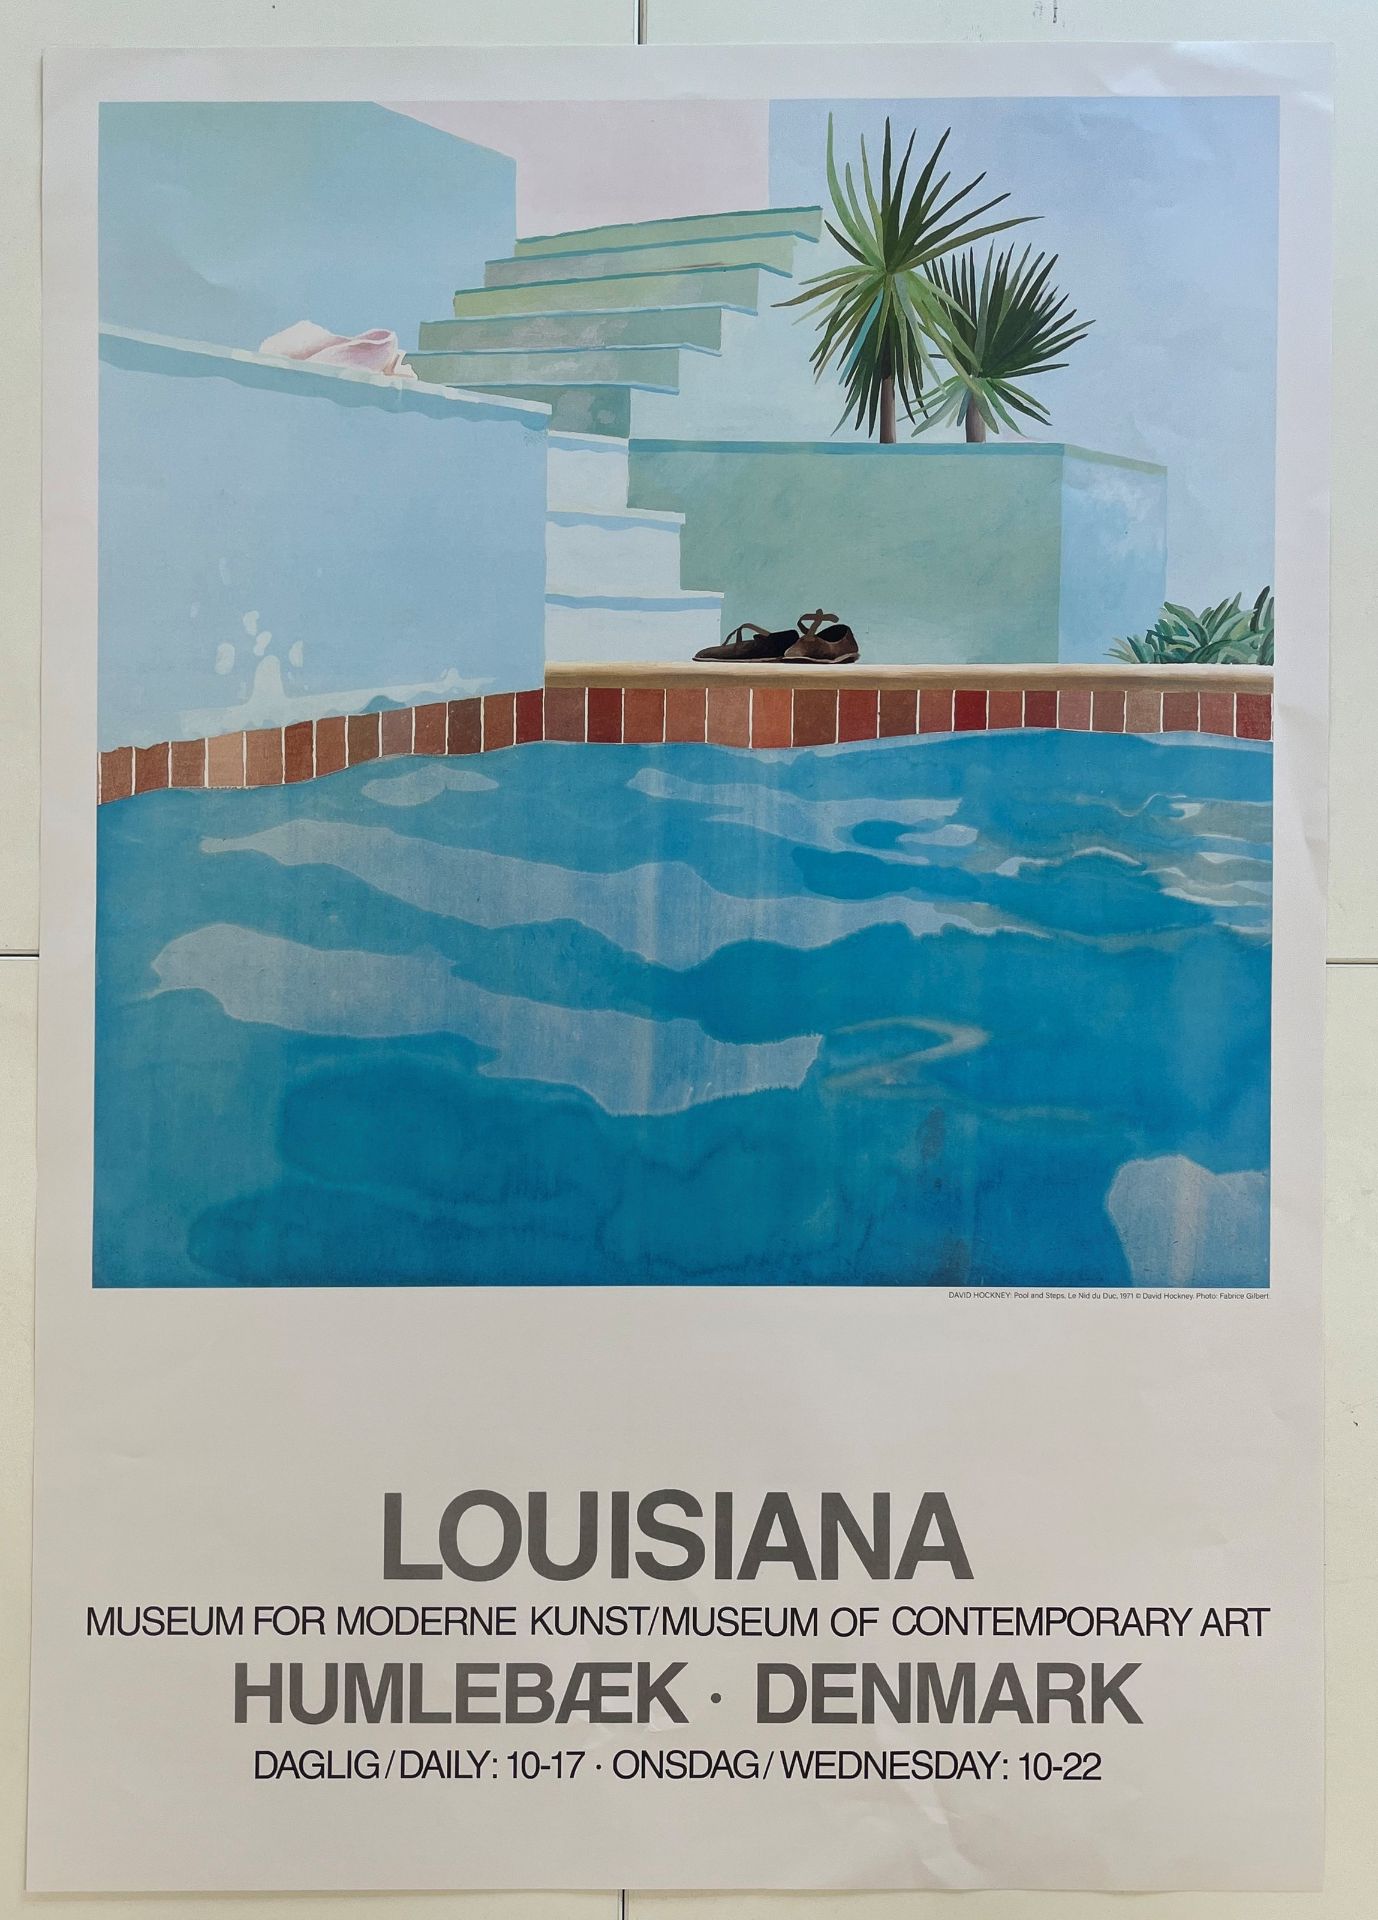 DAVID HOCKNEY - LOUISIANA MUSEUM OFFSET LITHOGRAPH POSTER - Image 2 of 5